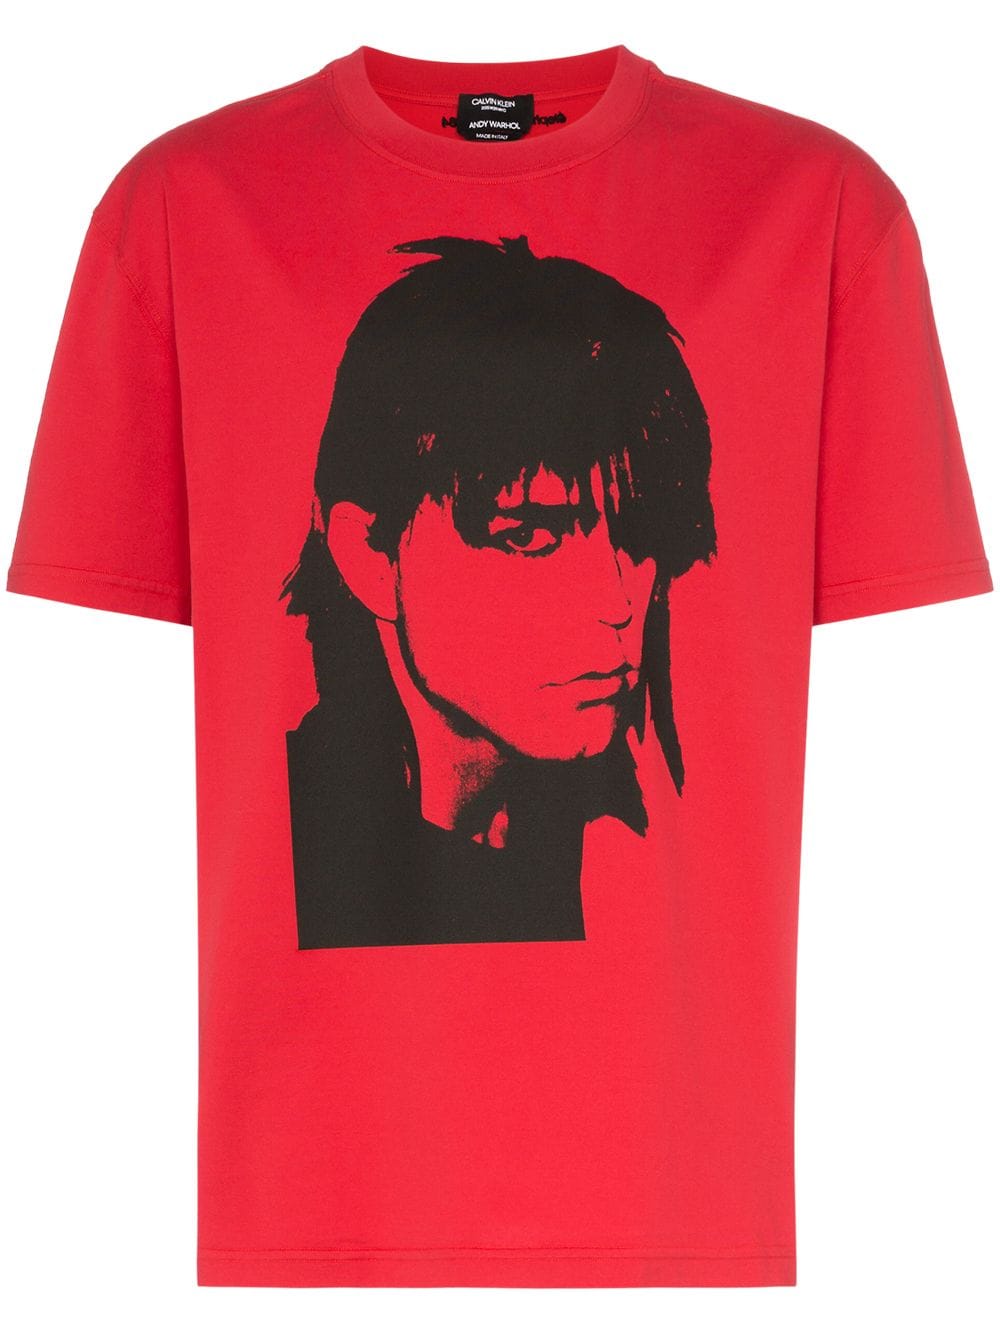 ＜Farfetch＞ ★39%OFF！Calvin Klein 205W39nyc プリント Tシャツ - レッド